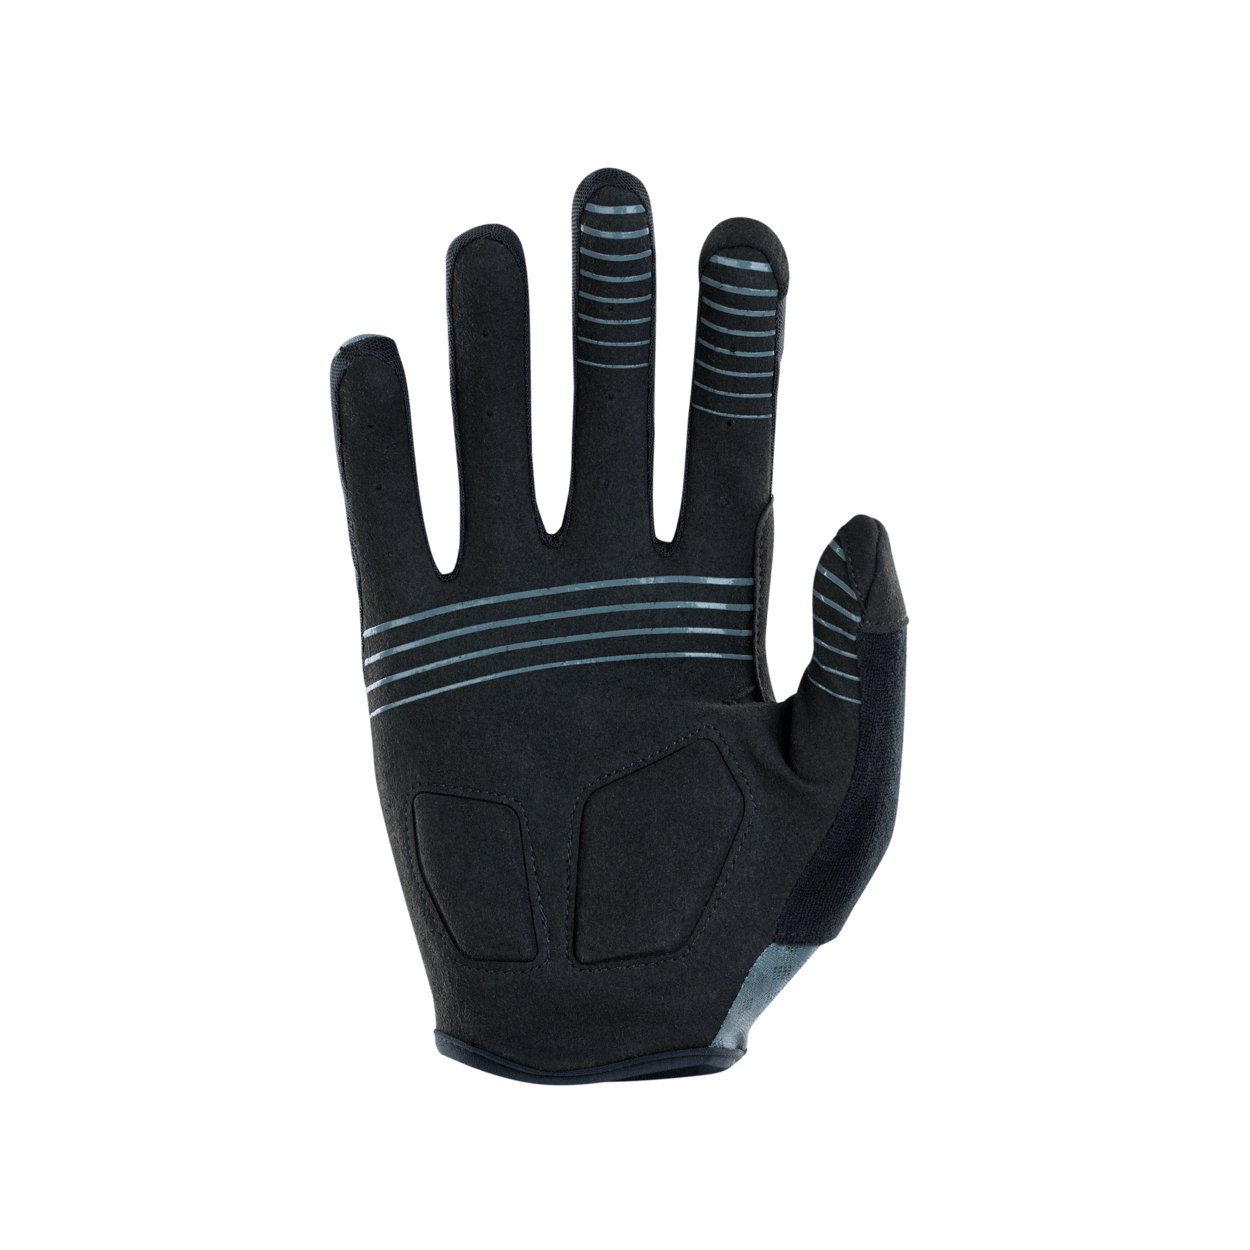 ION MTB Gloves Traze Long 2022 - Worthing Watersports - 9010583028002 - Gloves - ION Bike